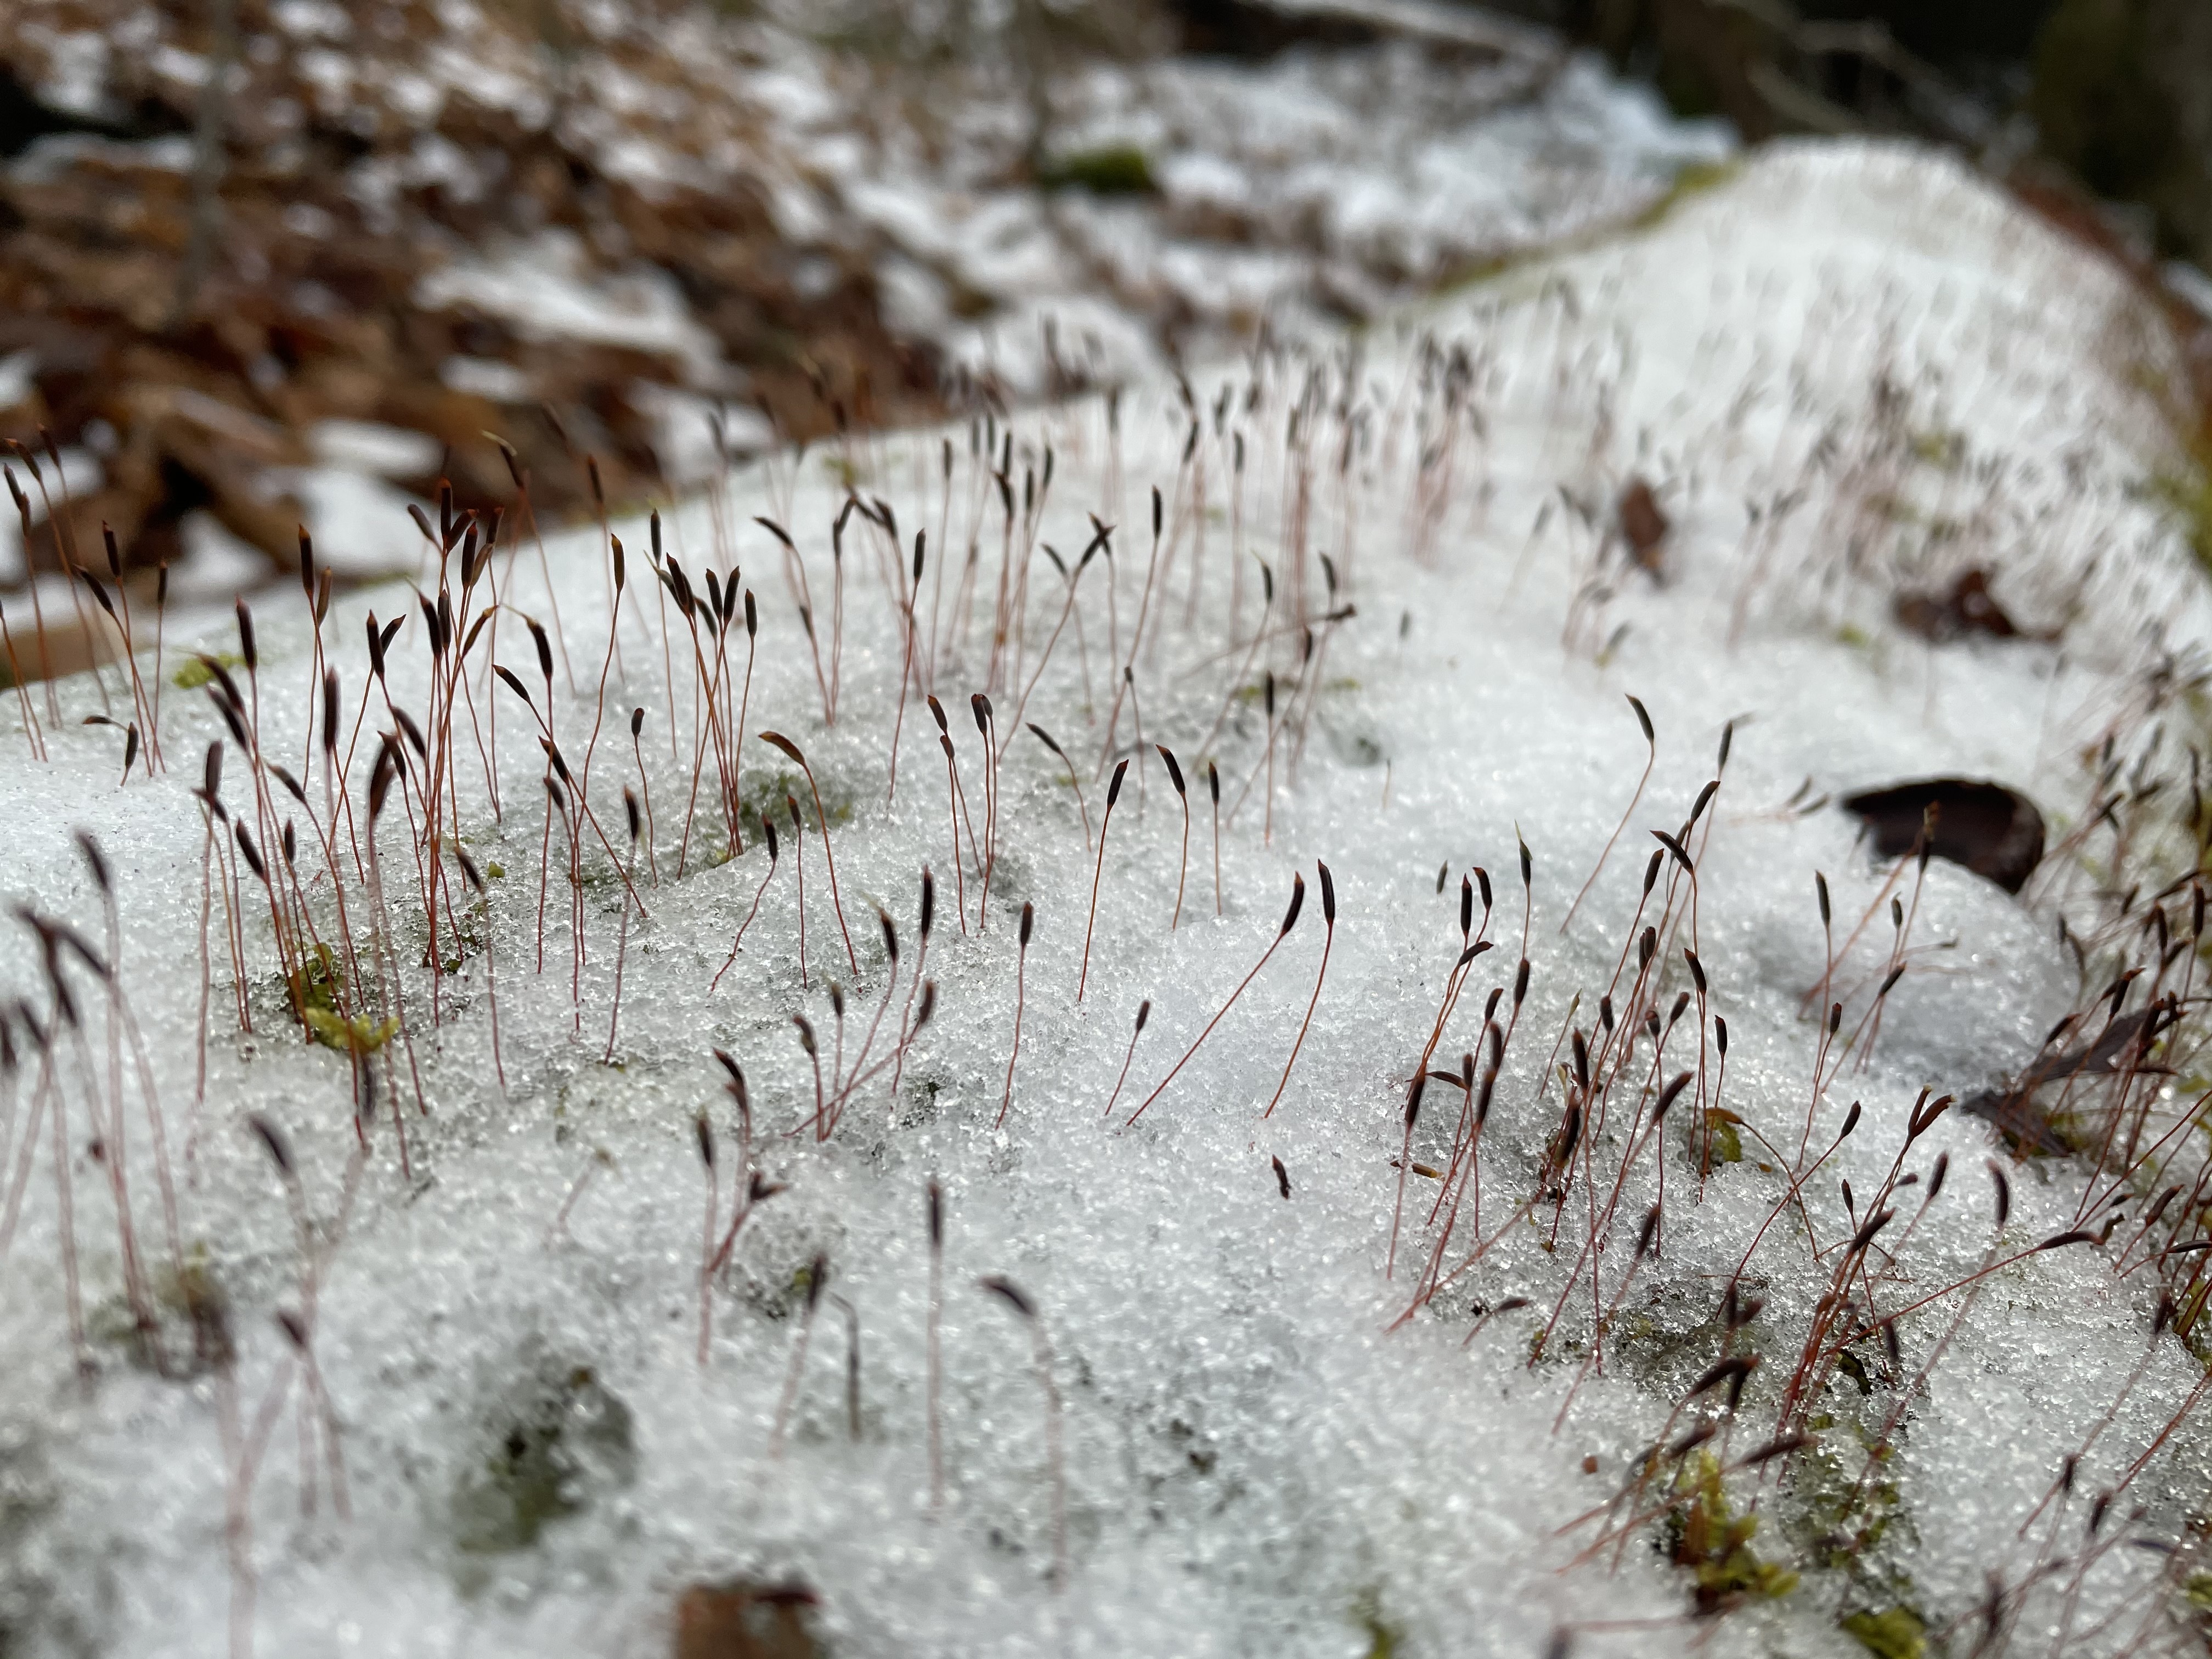 Tiny seedlings sprout out of a snow-covered tree trunk.